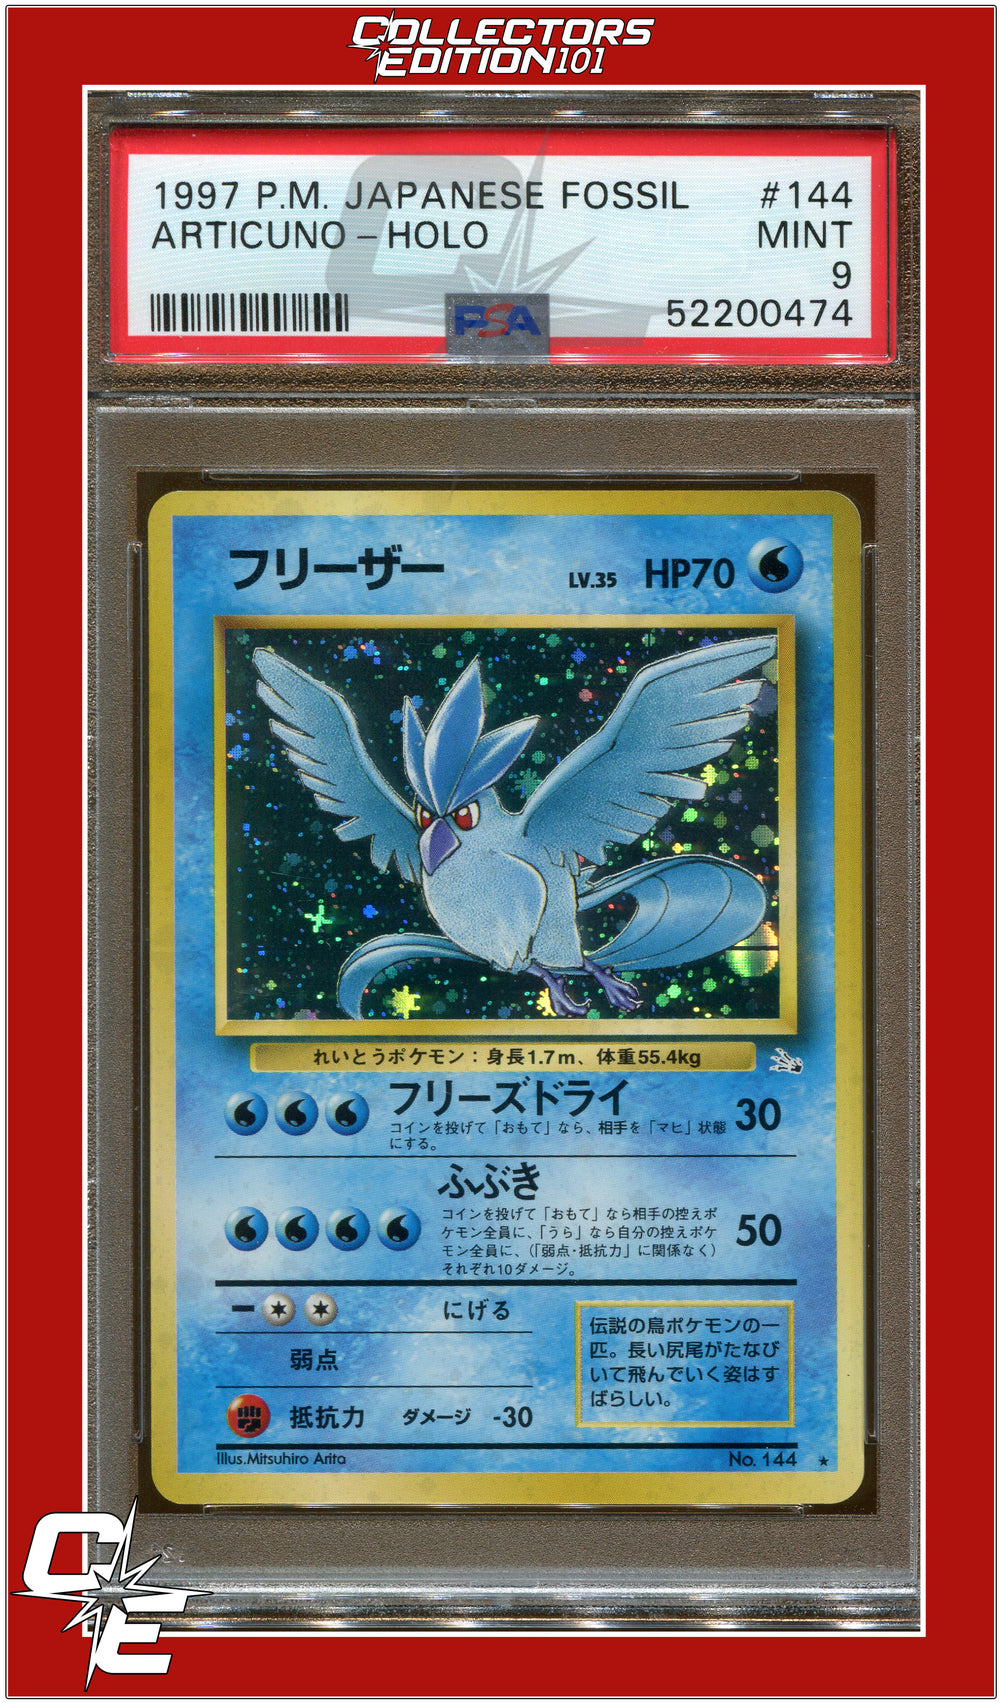 Japanese Fossil 144 Articuno Holo PSA 9